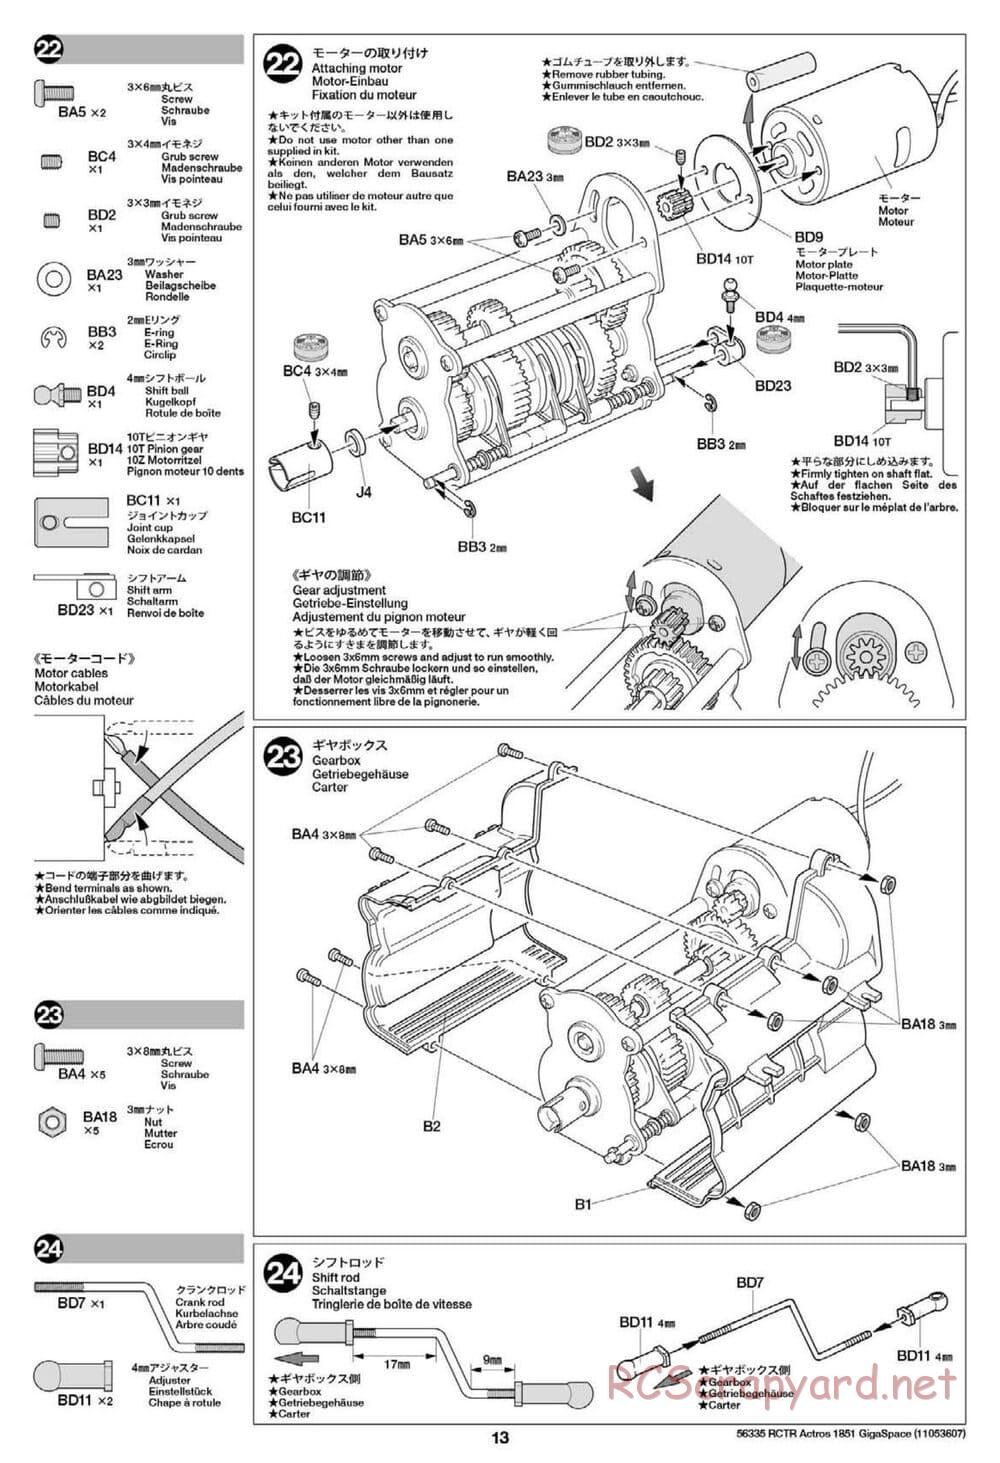 Tamiya - Mercedes-Benz Actros 1851 Gigaspace Tractor Truck Chassis - Manual - Page 13